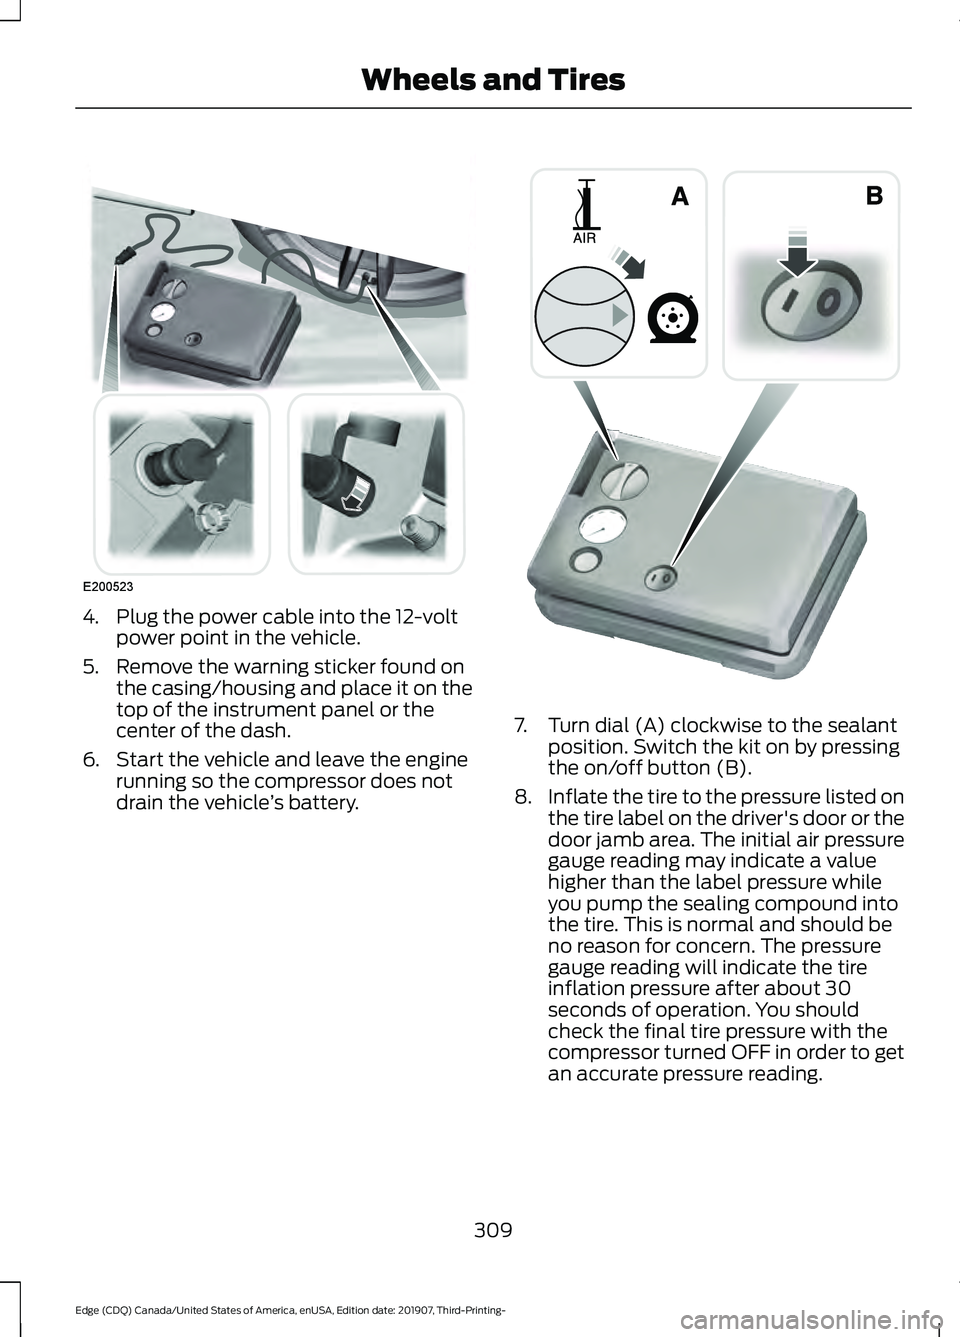 FORD EDGE 2020 Service Manual 4. Plug the power cable into the 12-volt
power point in the vehicle.
5. Remove the warning sticker found on the casing/housing and place it on the
top of the instrument panel or the
center of the dash